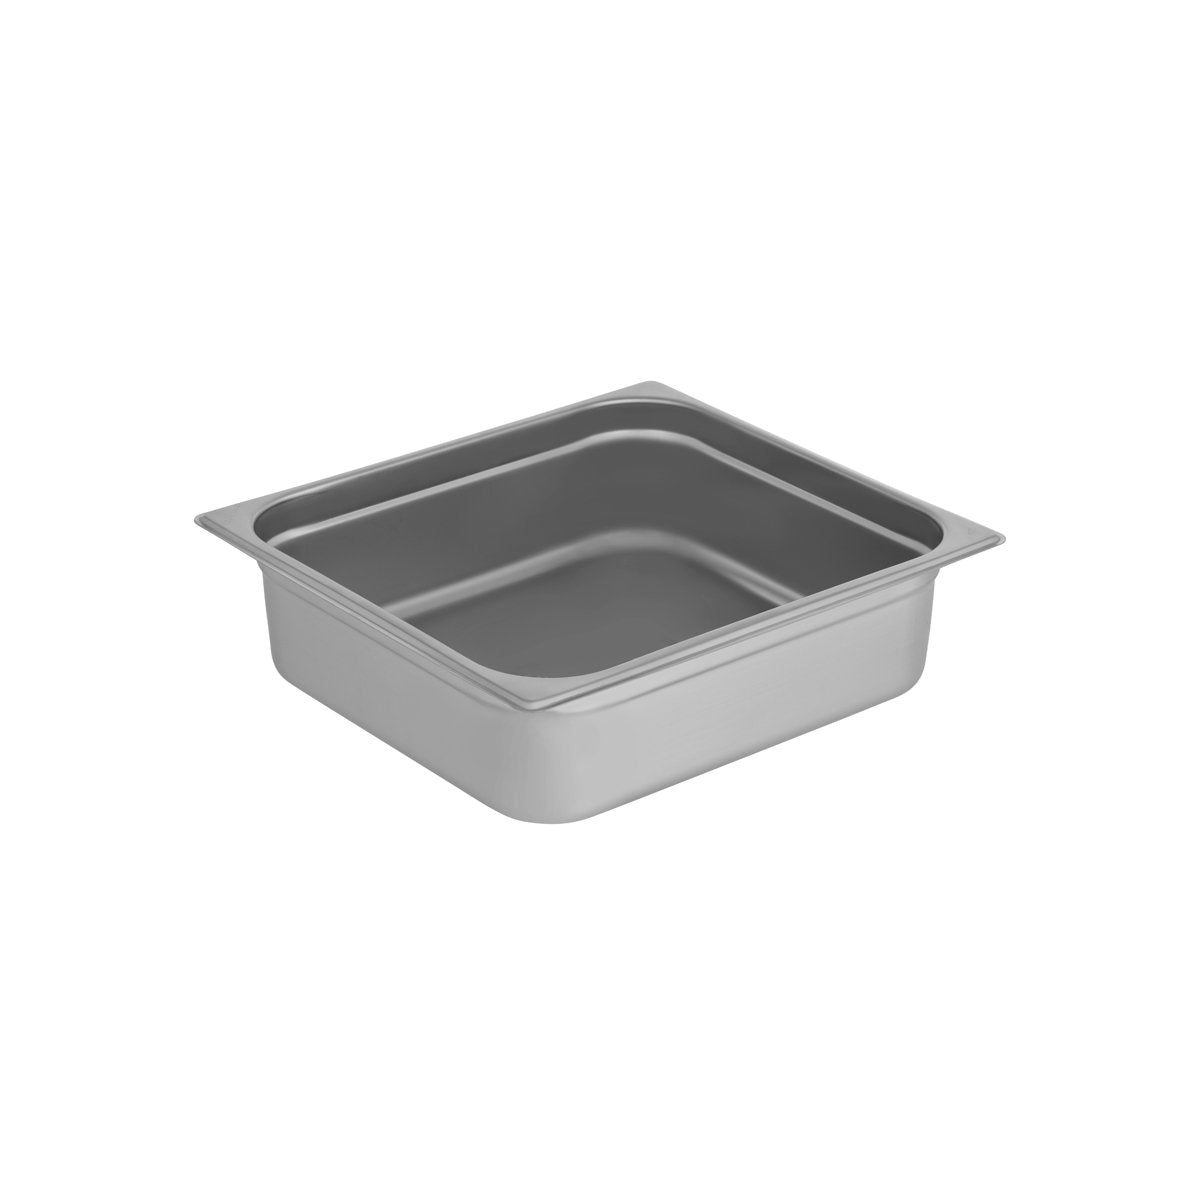 GN-23100 Chef Inox Gastronorm Pan 2/3 Size 100mm Tomkin Australia Hospitality Supplies